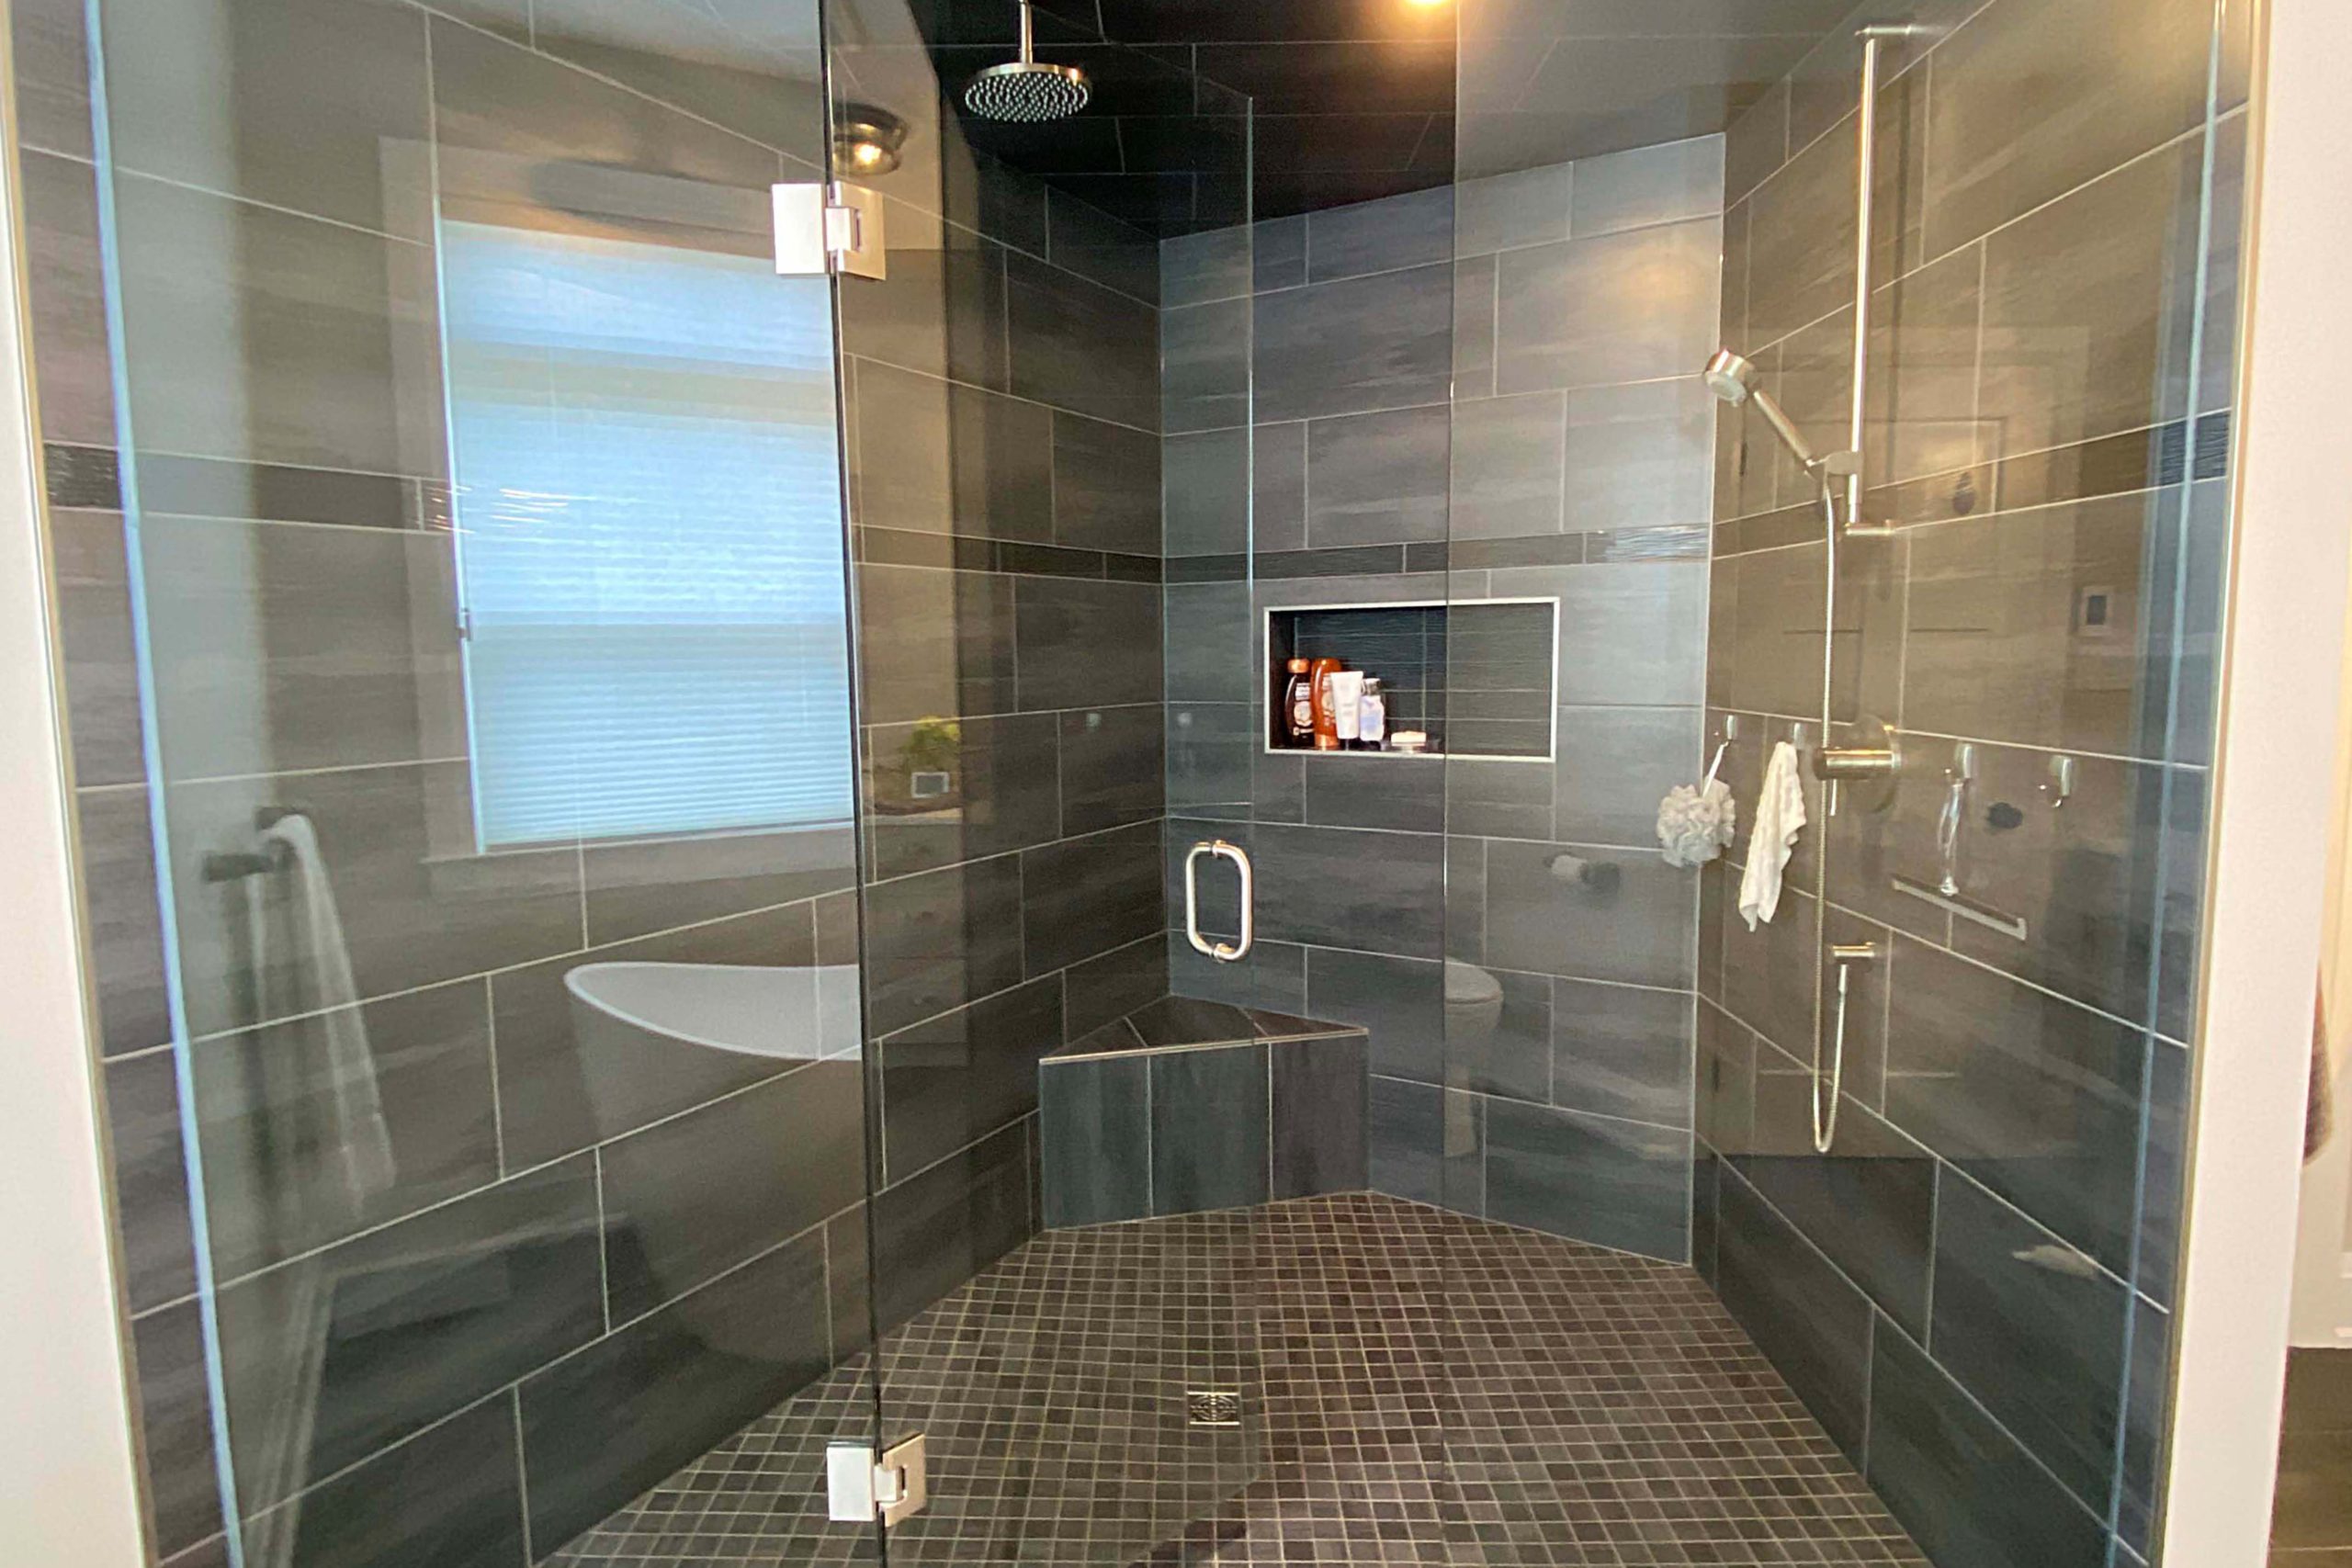 Large Walk-in Shower with Niche